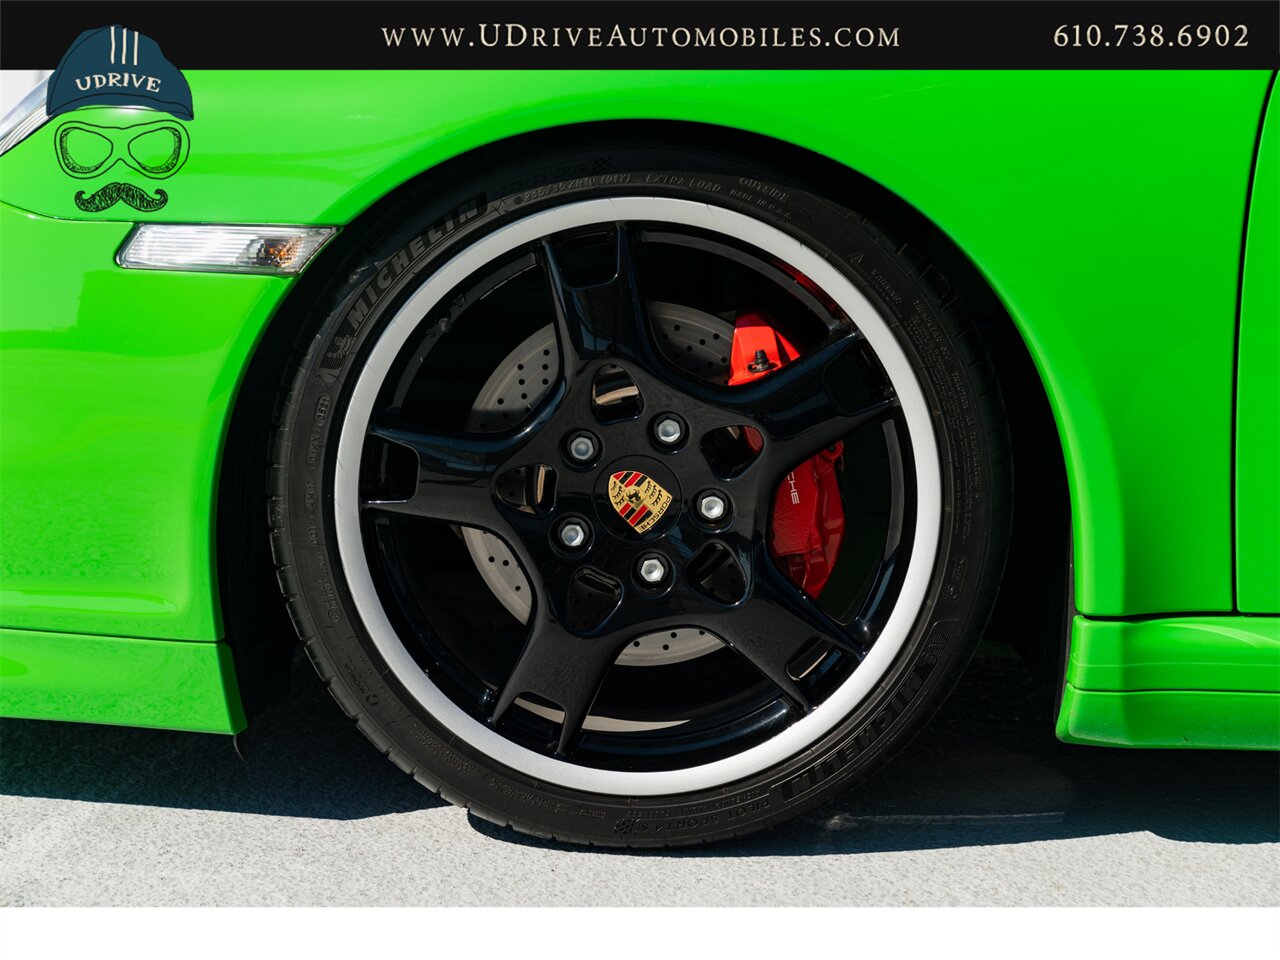 2006 Porsche 911 Carrera 4S  997 PTS Signal Green 6Sp Sport Sts Spt Chrono Spt Exhst - Photo 57 - West Chester, PA 19382